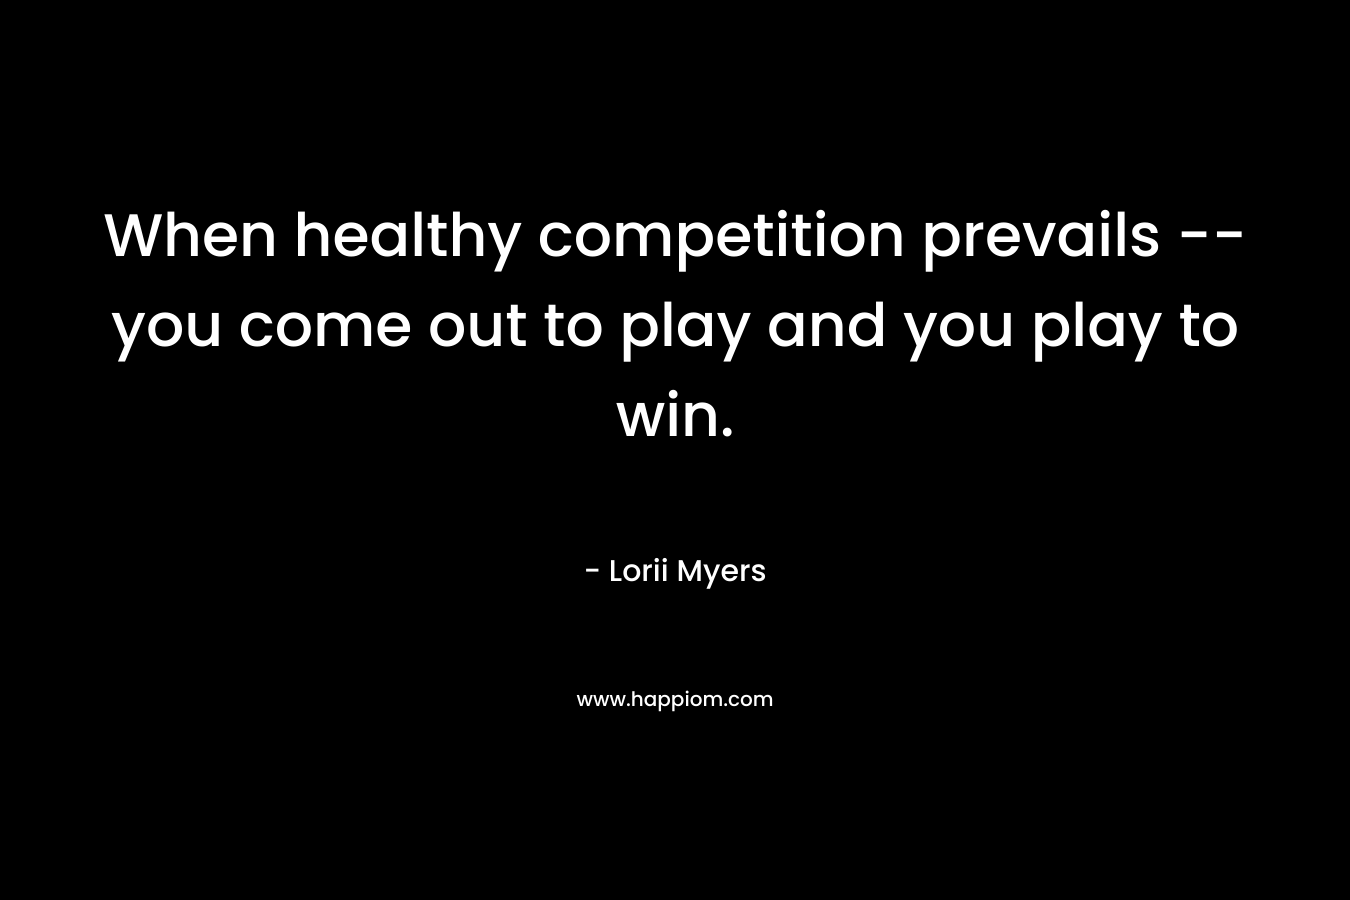 When healthy competition prevails -- you come out to play and you play to win.